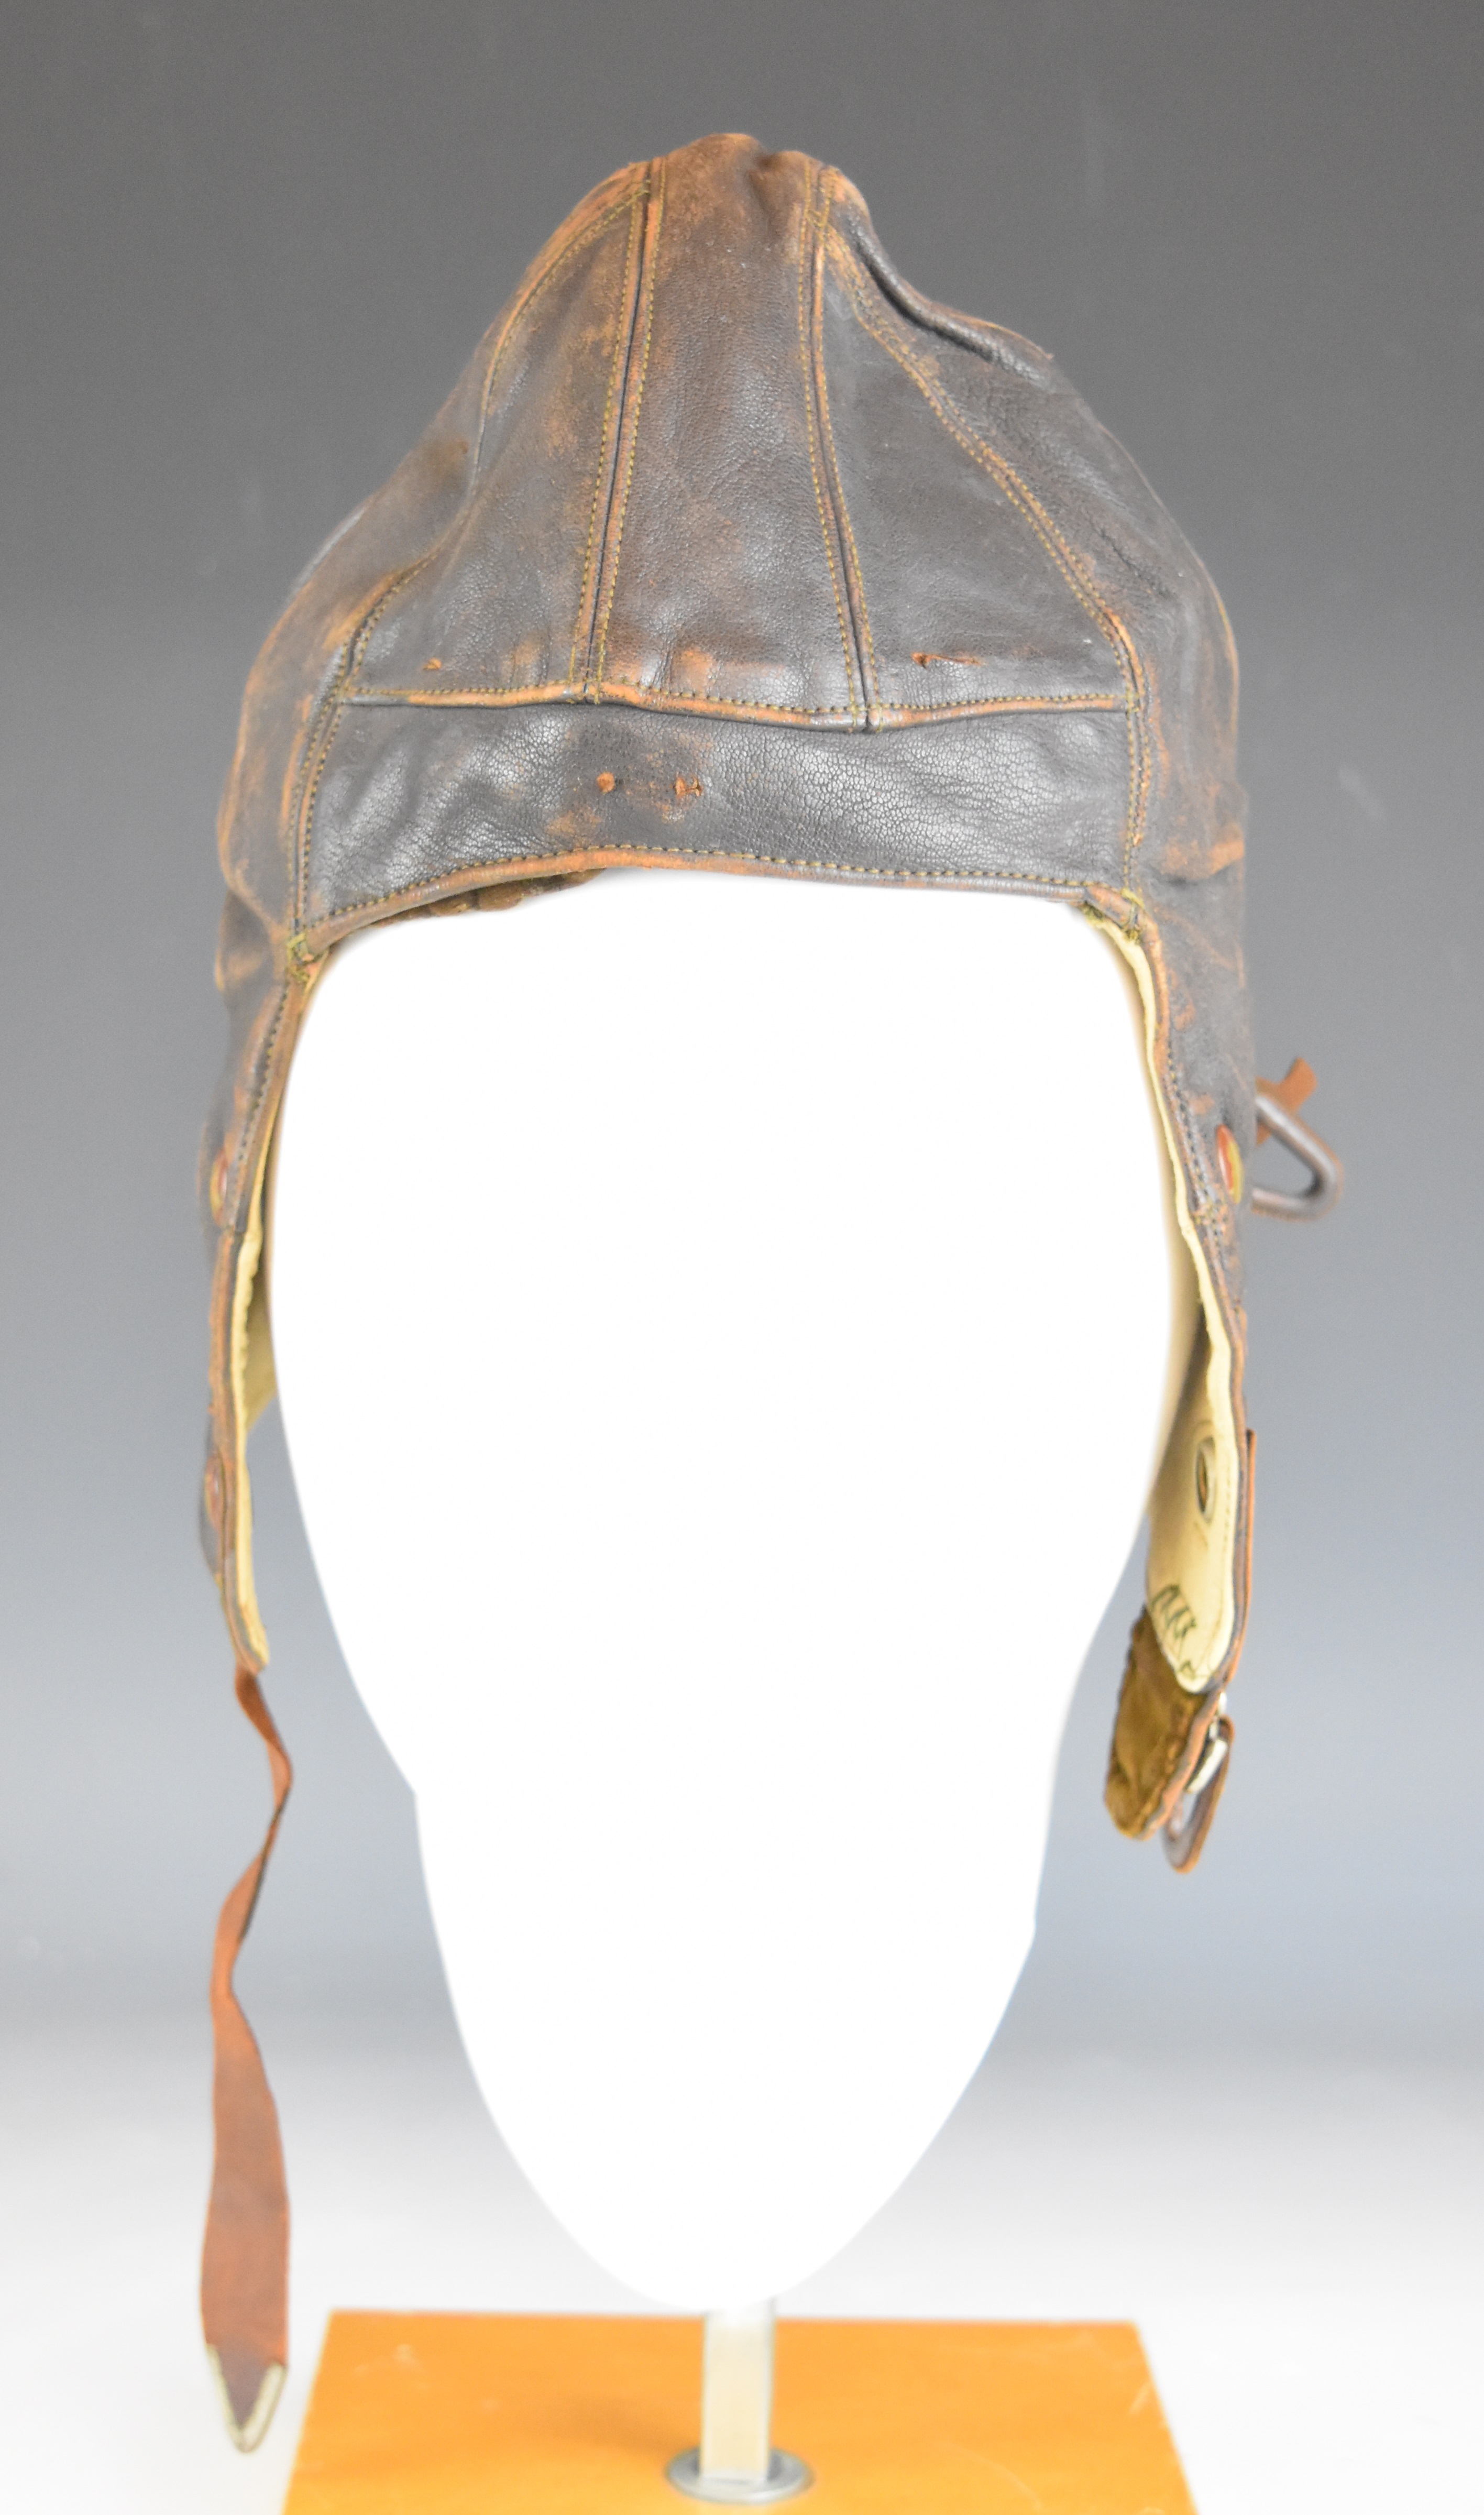 British WW2 leather flying helmet stamped AM 226/65 with label Wareings, Northampton, No 1, size - Image 8 of 8